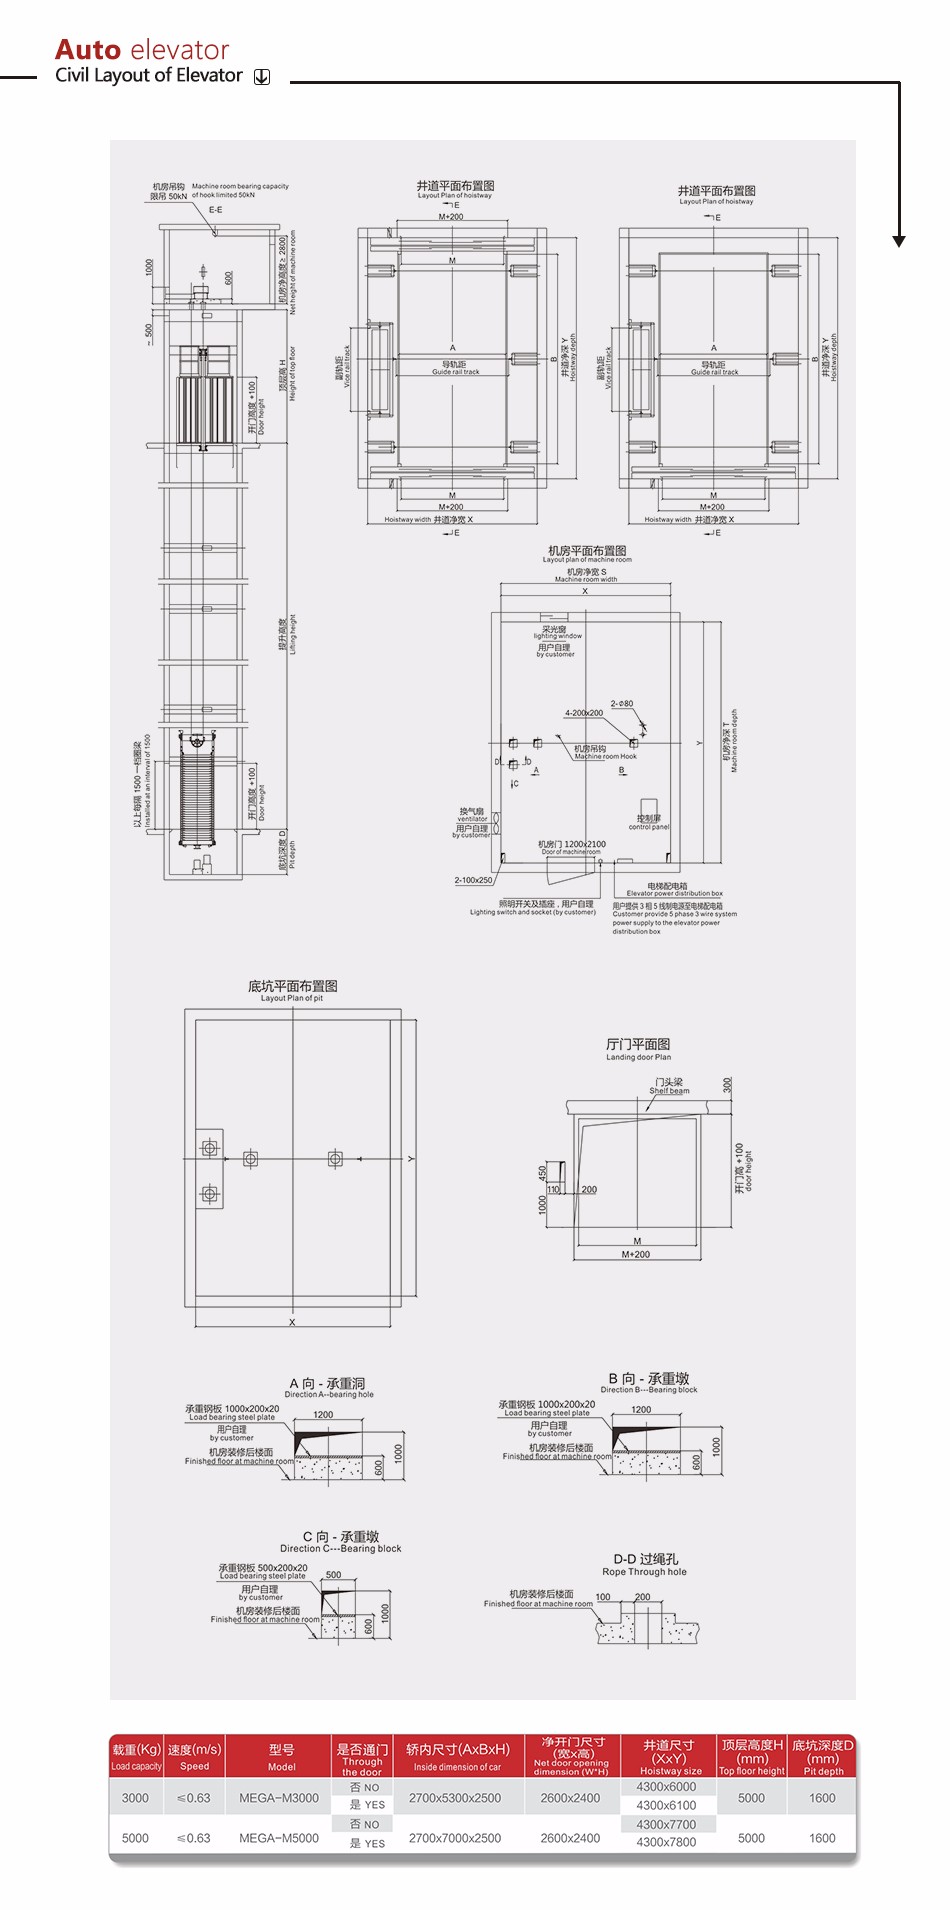 Fuji elevator for cars for parking / elevator for auto / elevator for vehicles